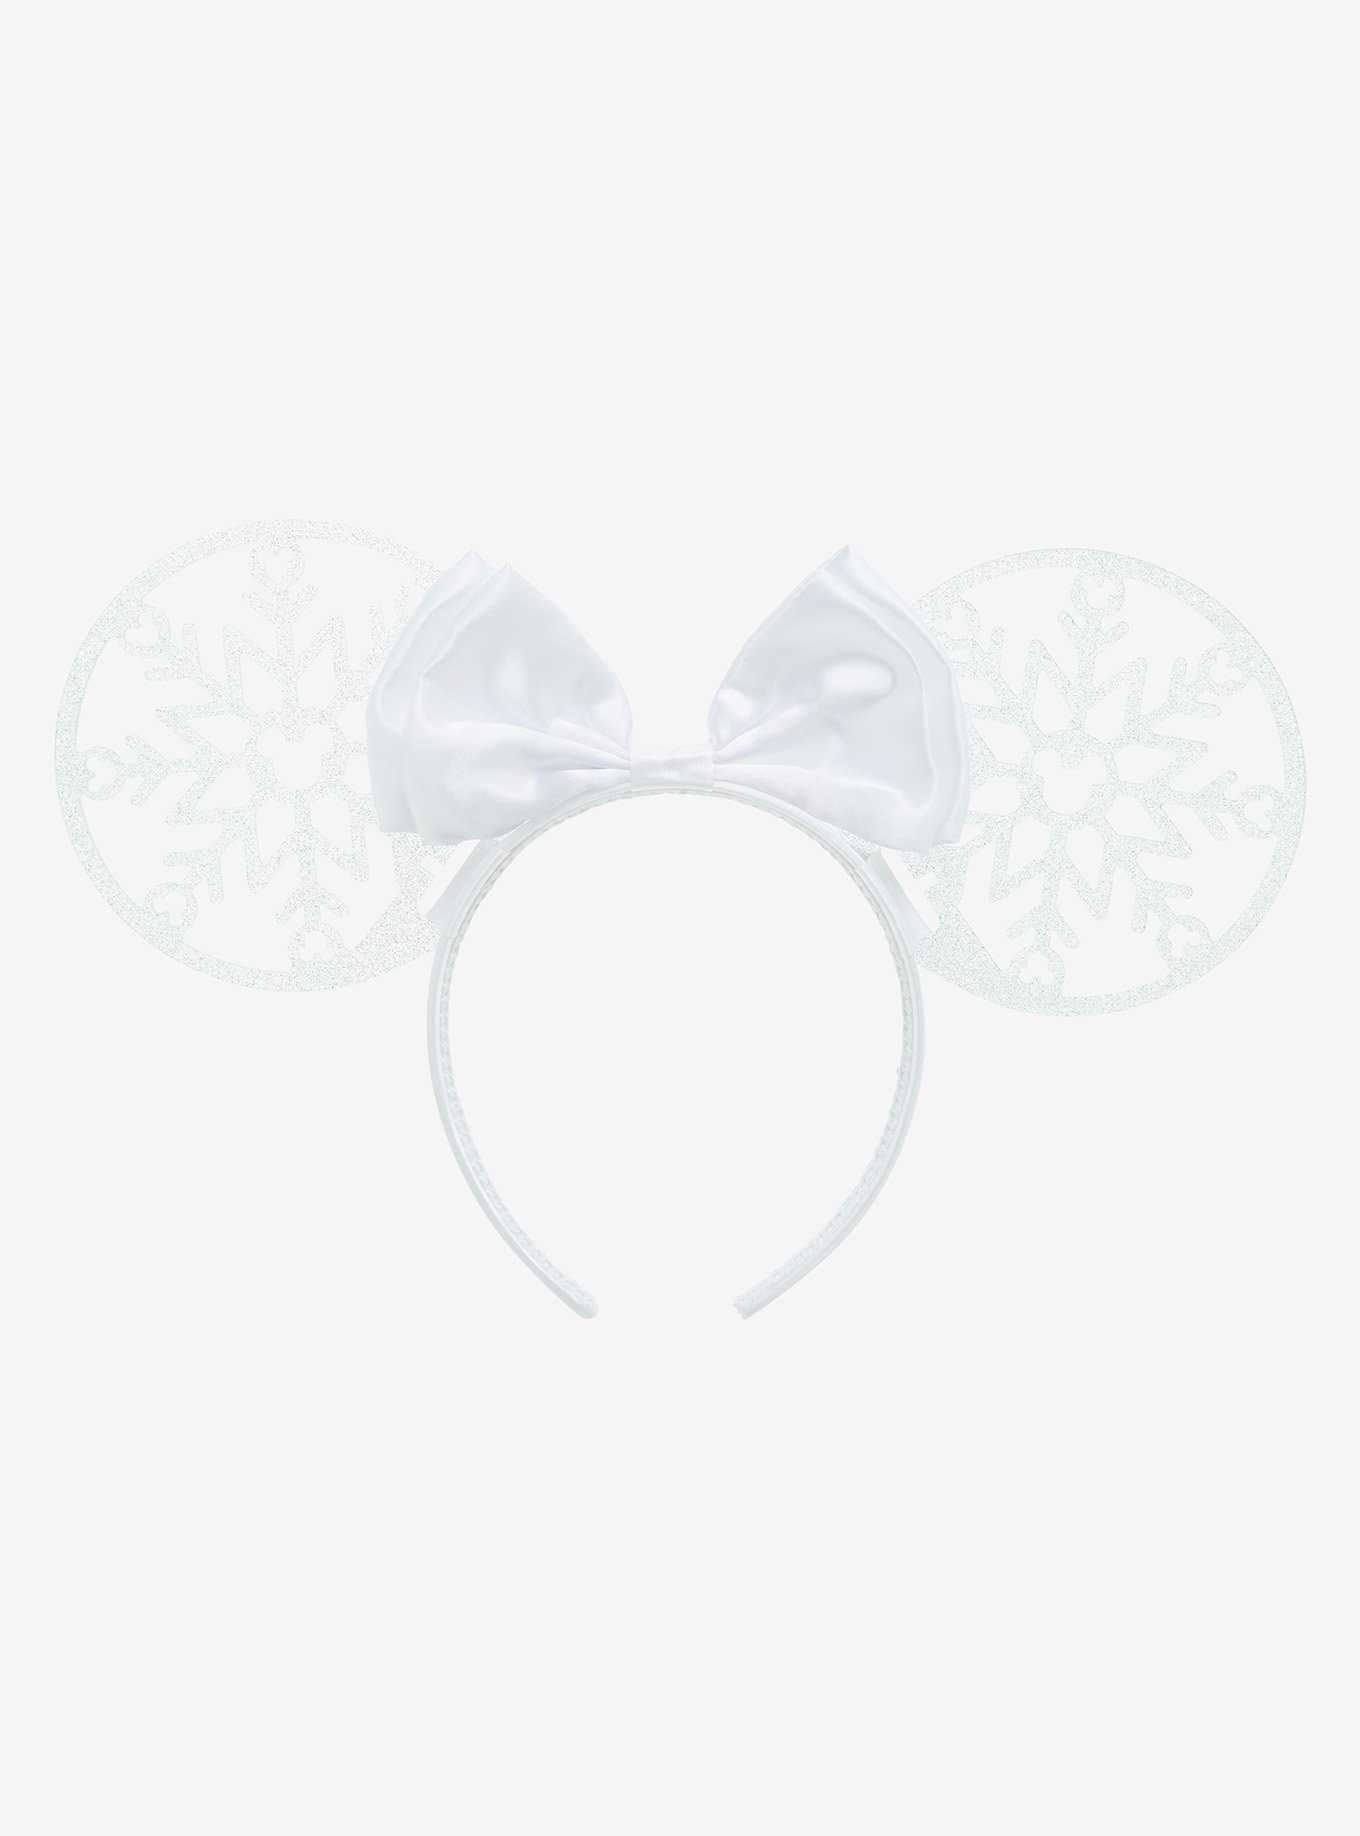 Disney Minnie Mouse Snowflake Ears Headband - BoxLunch Exclusive, , hi-res